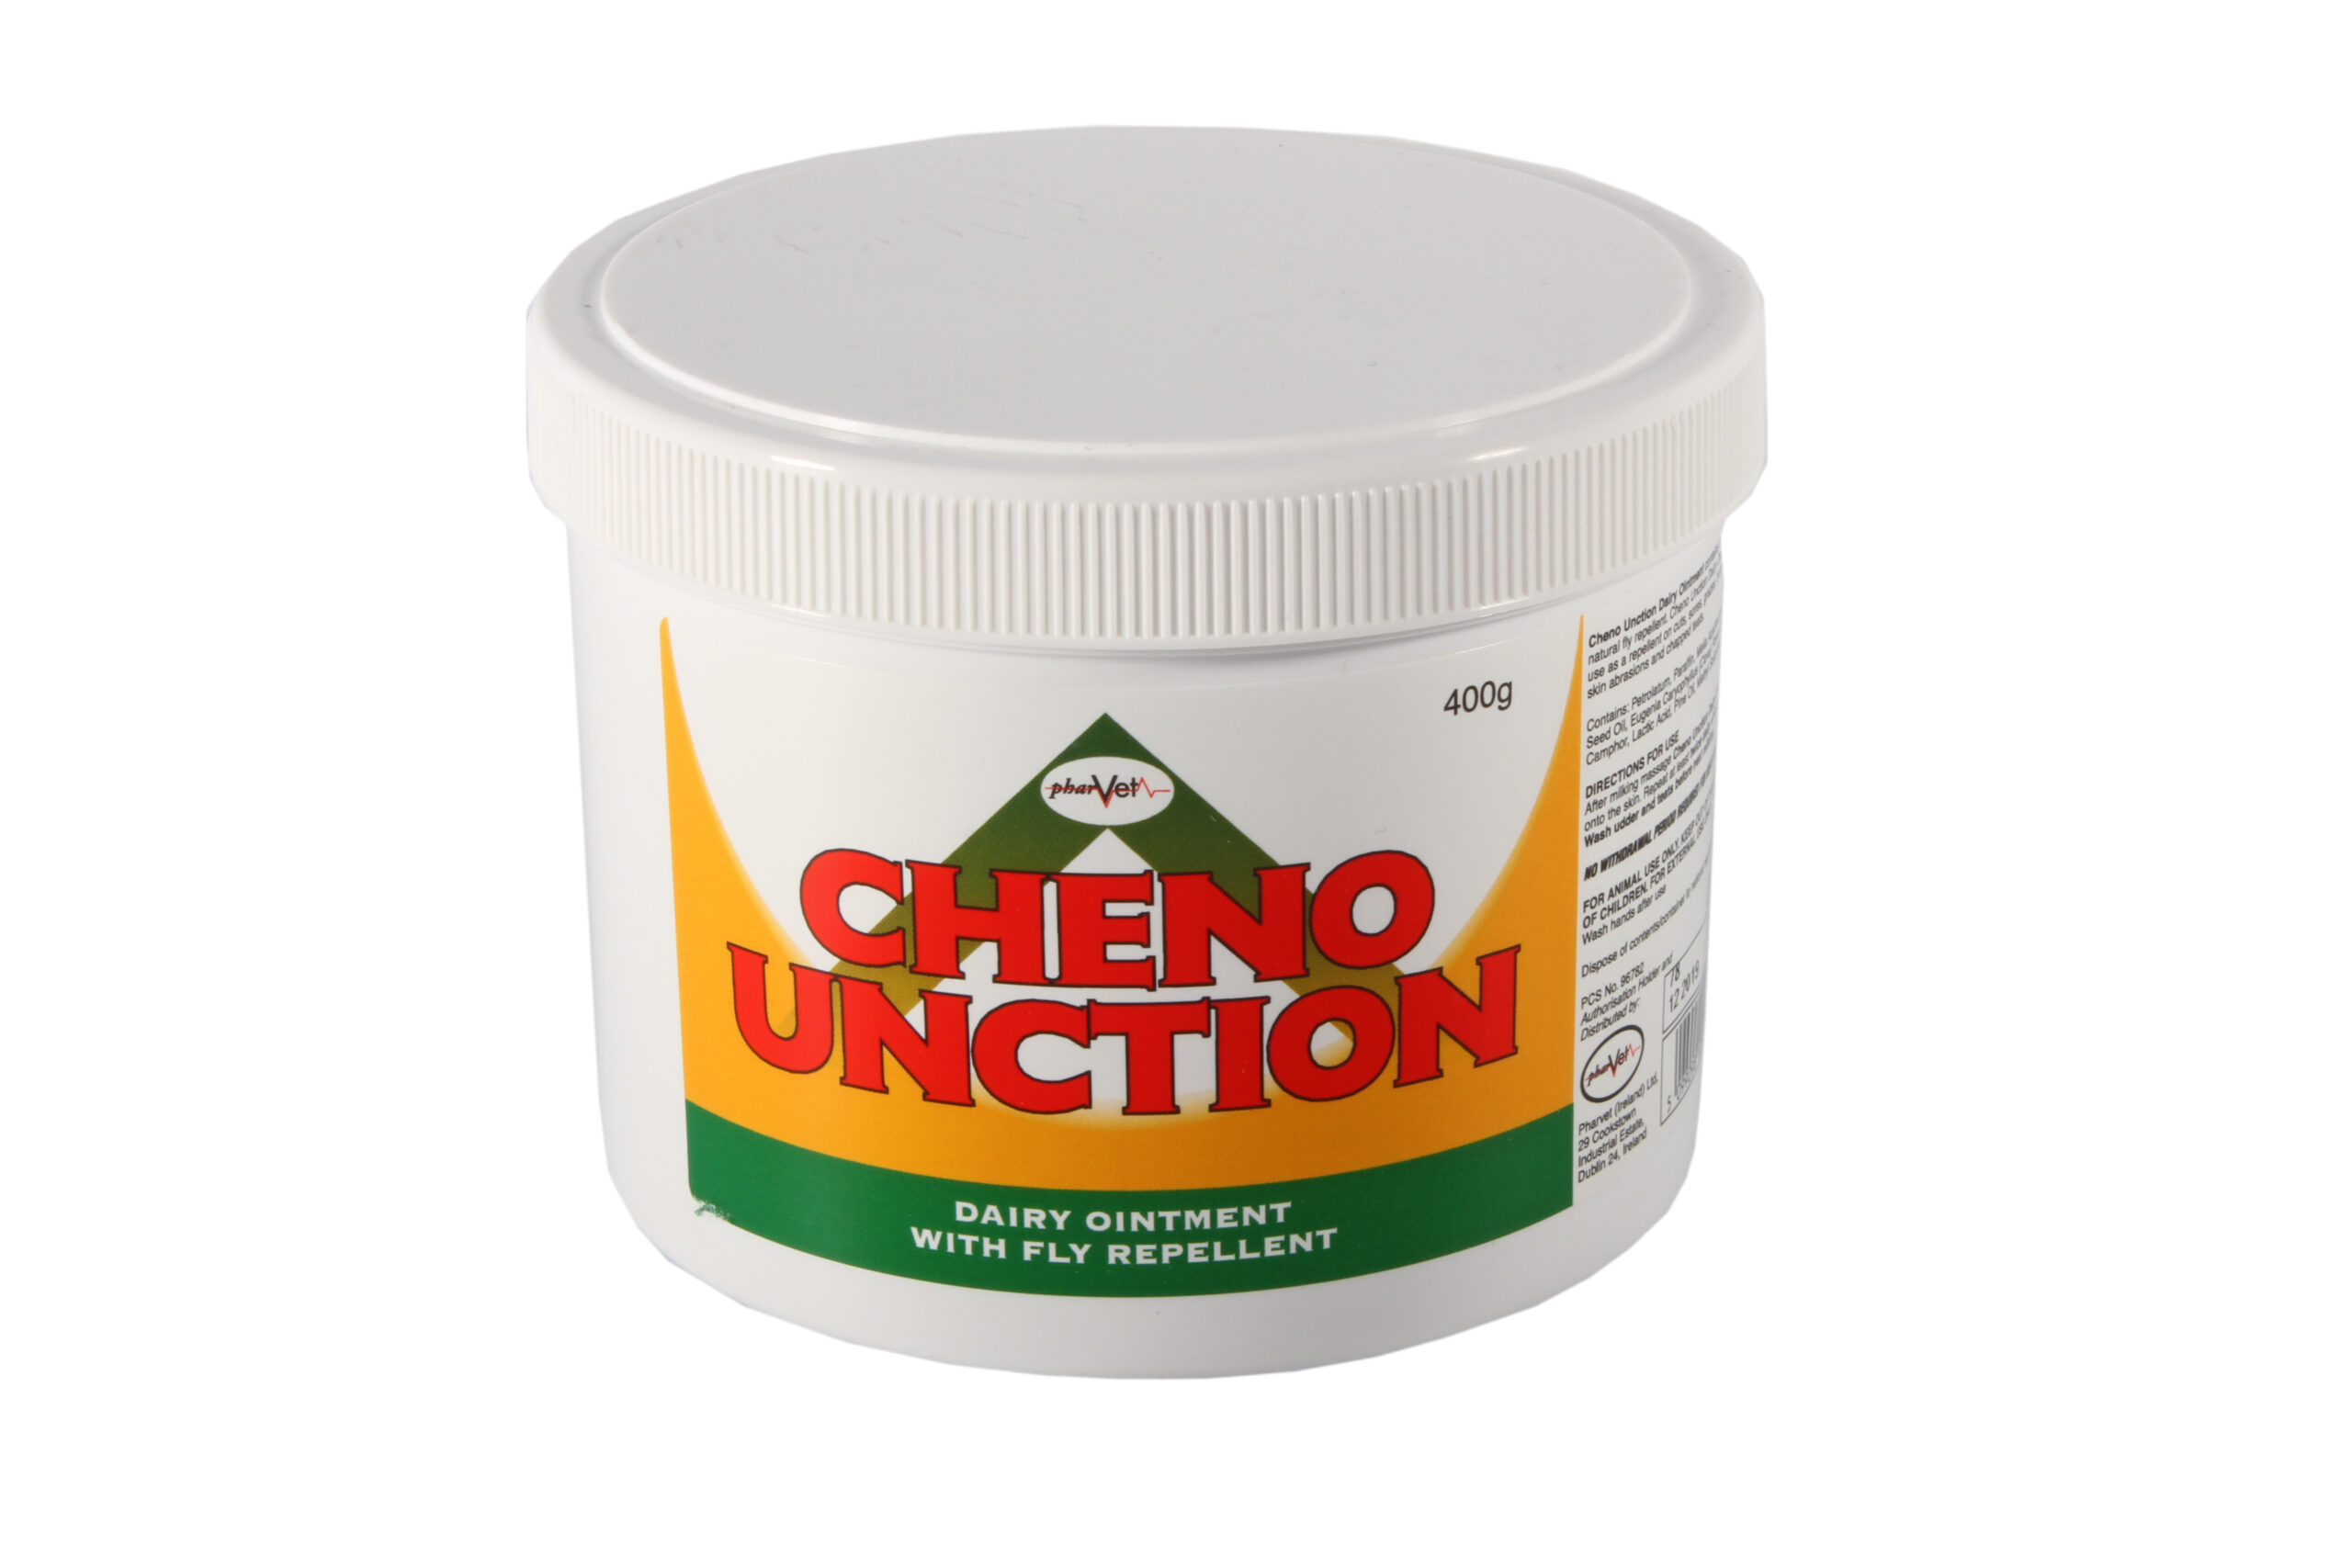 Cheno Unction Ointment